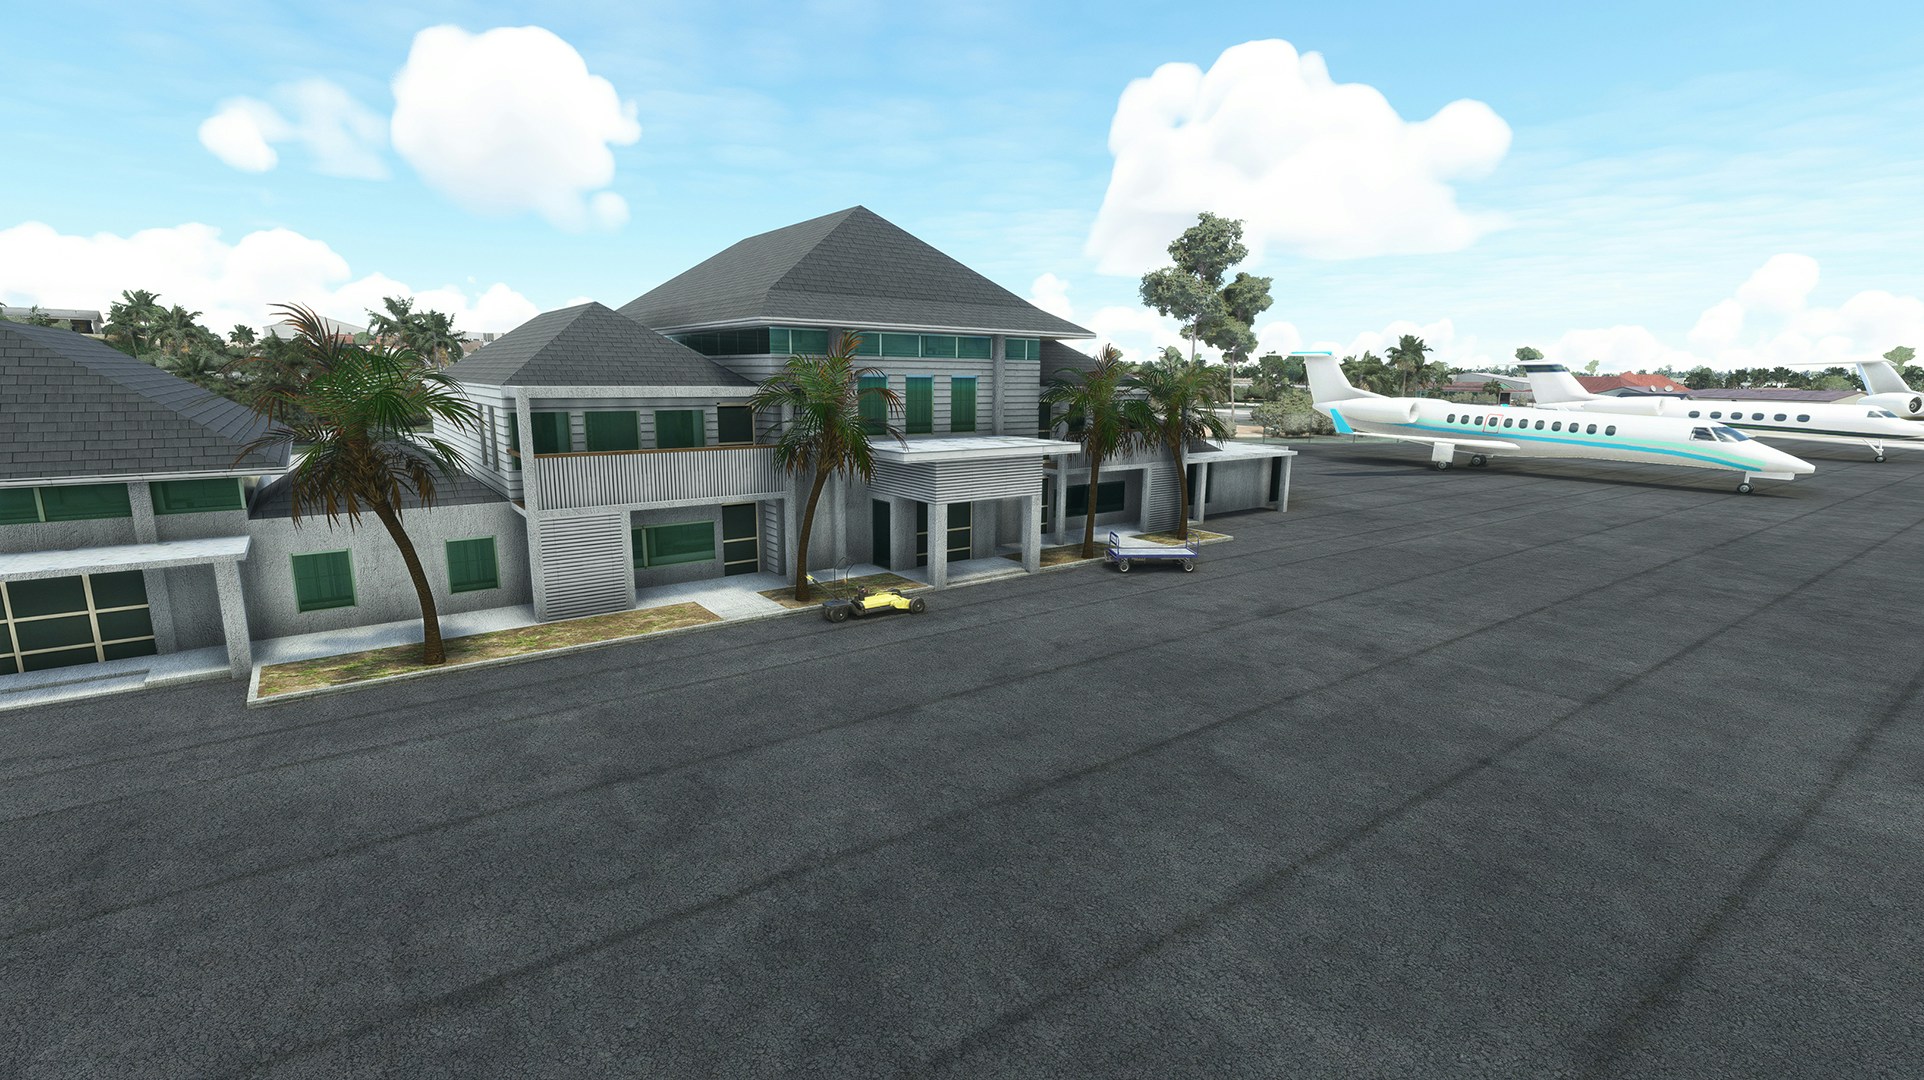 Final Approach Simulations Releases Providenciales for MSFS